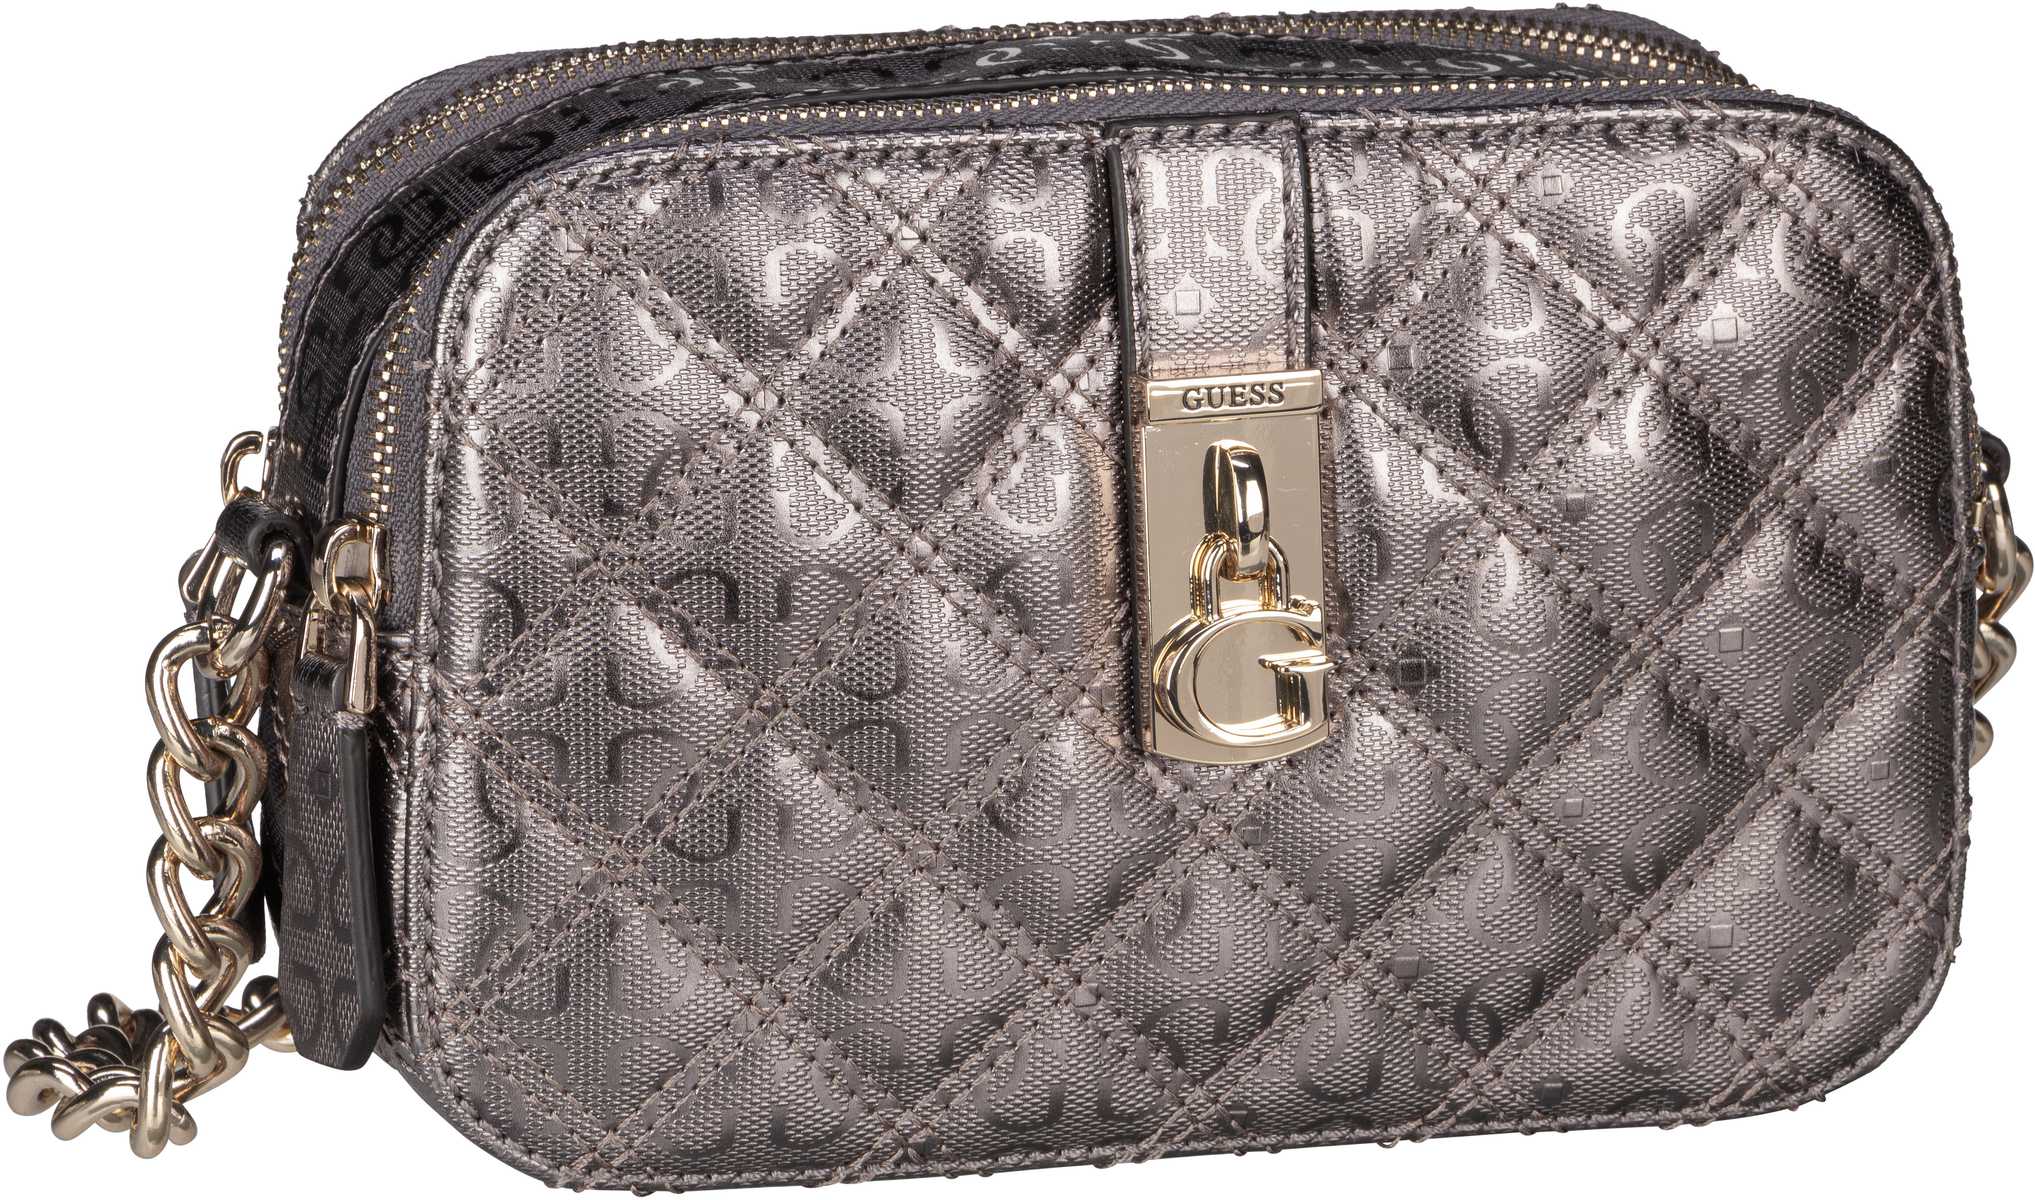 Guess Noelle Crossbody Camera G Shine - Pewter